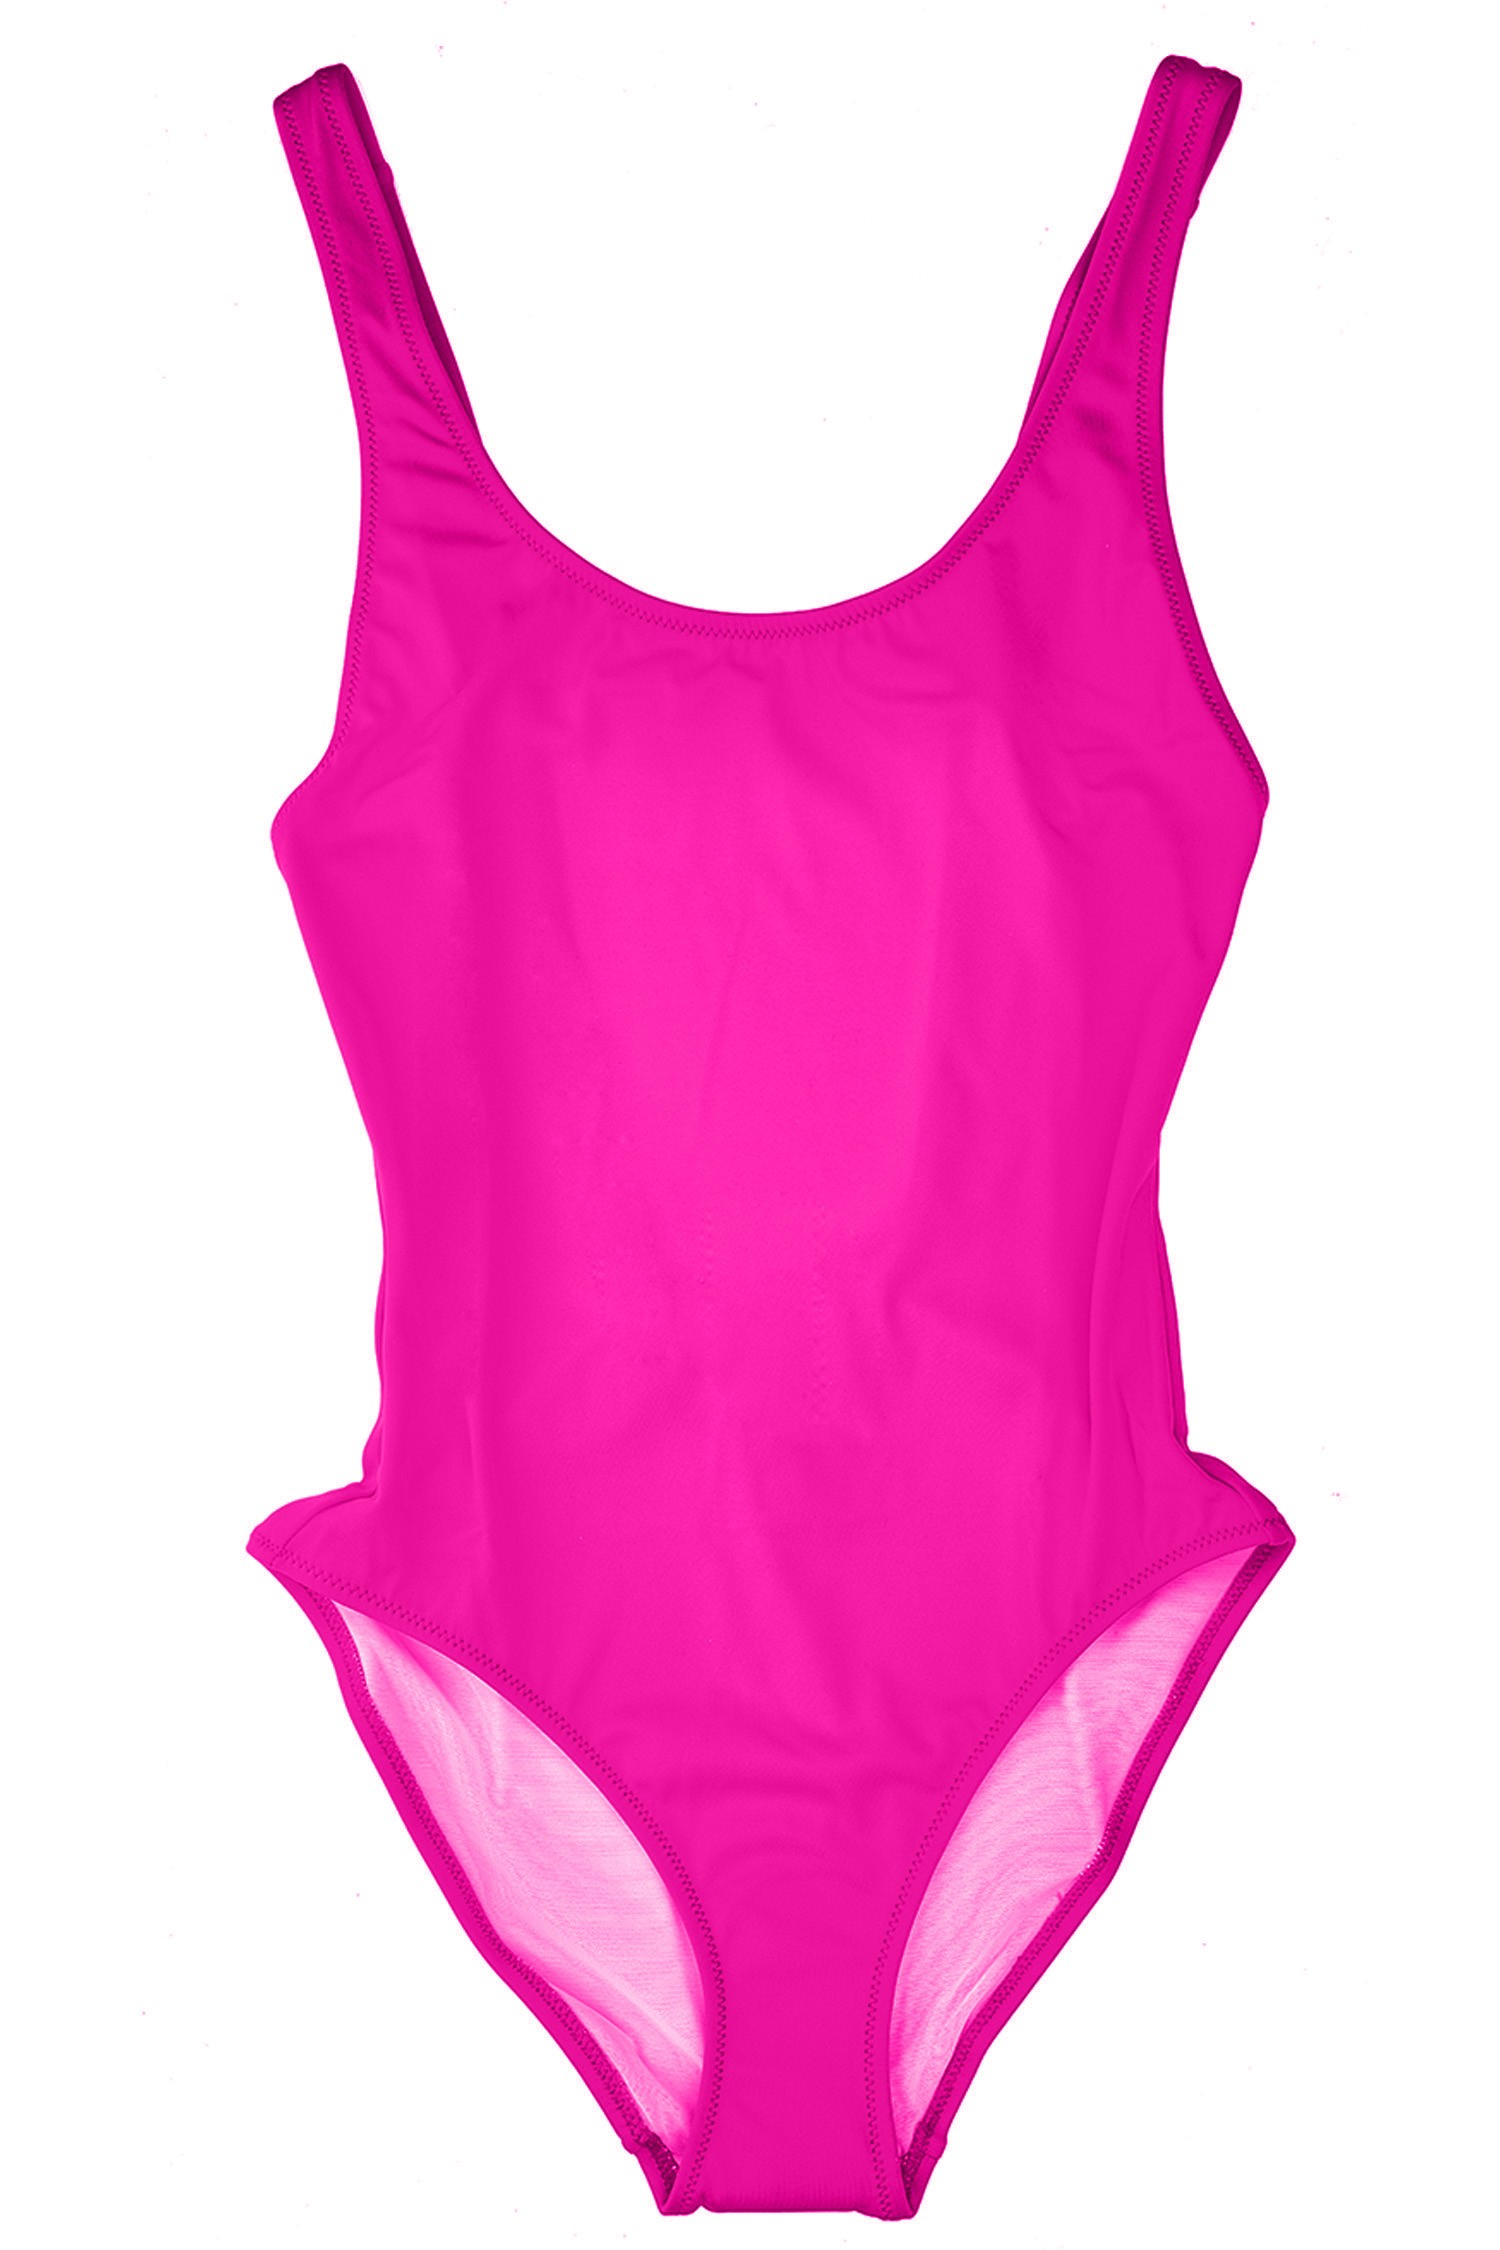 Lisa perry + Solid & Striped Bathing Suit in Pink (Hot Pink) | Lyst